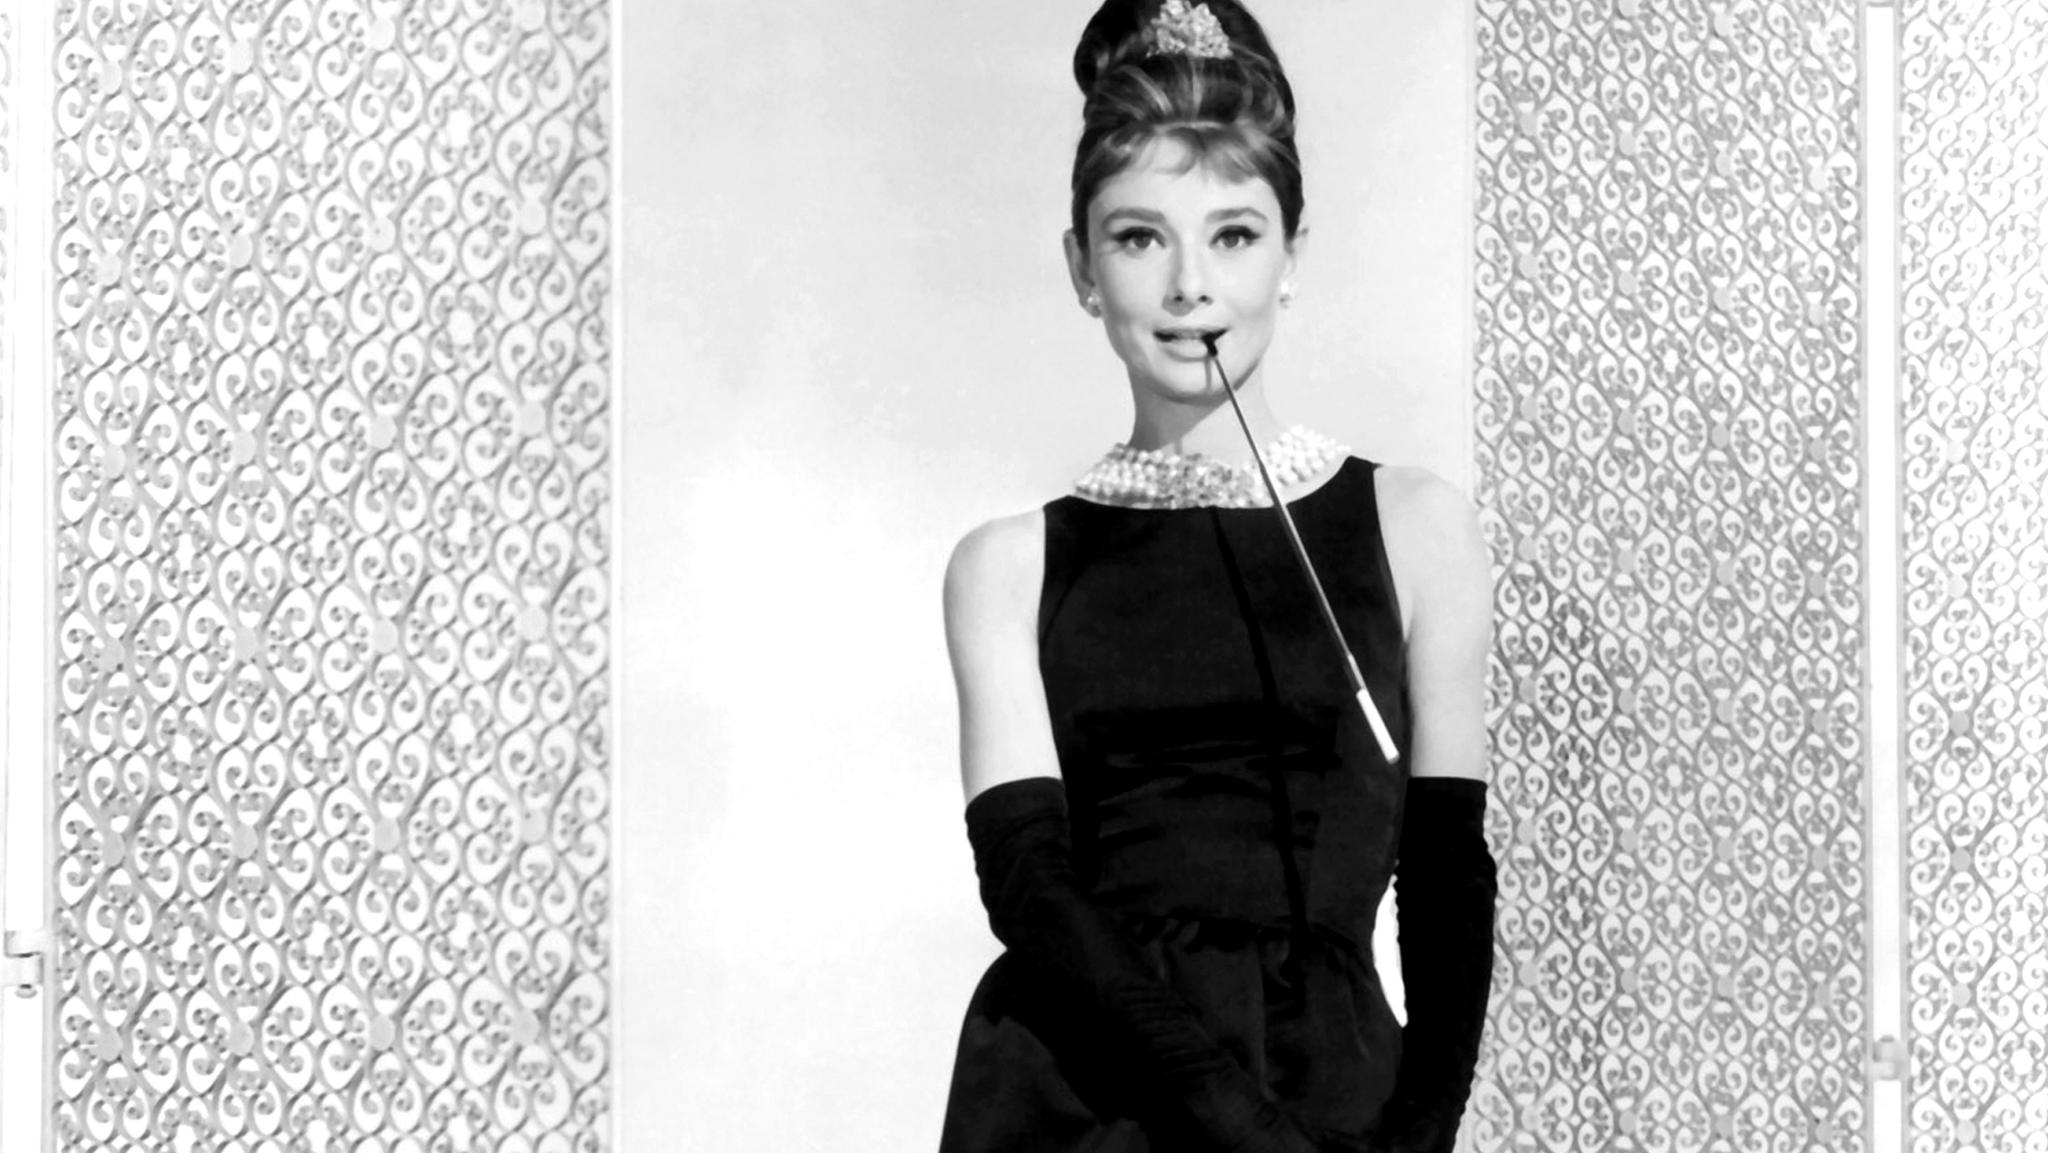 Hubert de Givenchy dies, but little black dress lives on as style icon |  The Australian